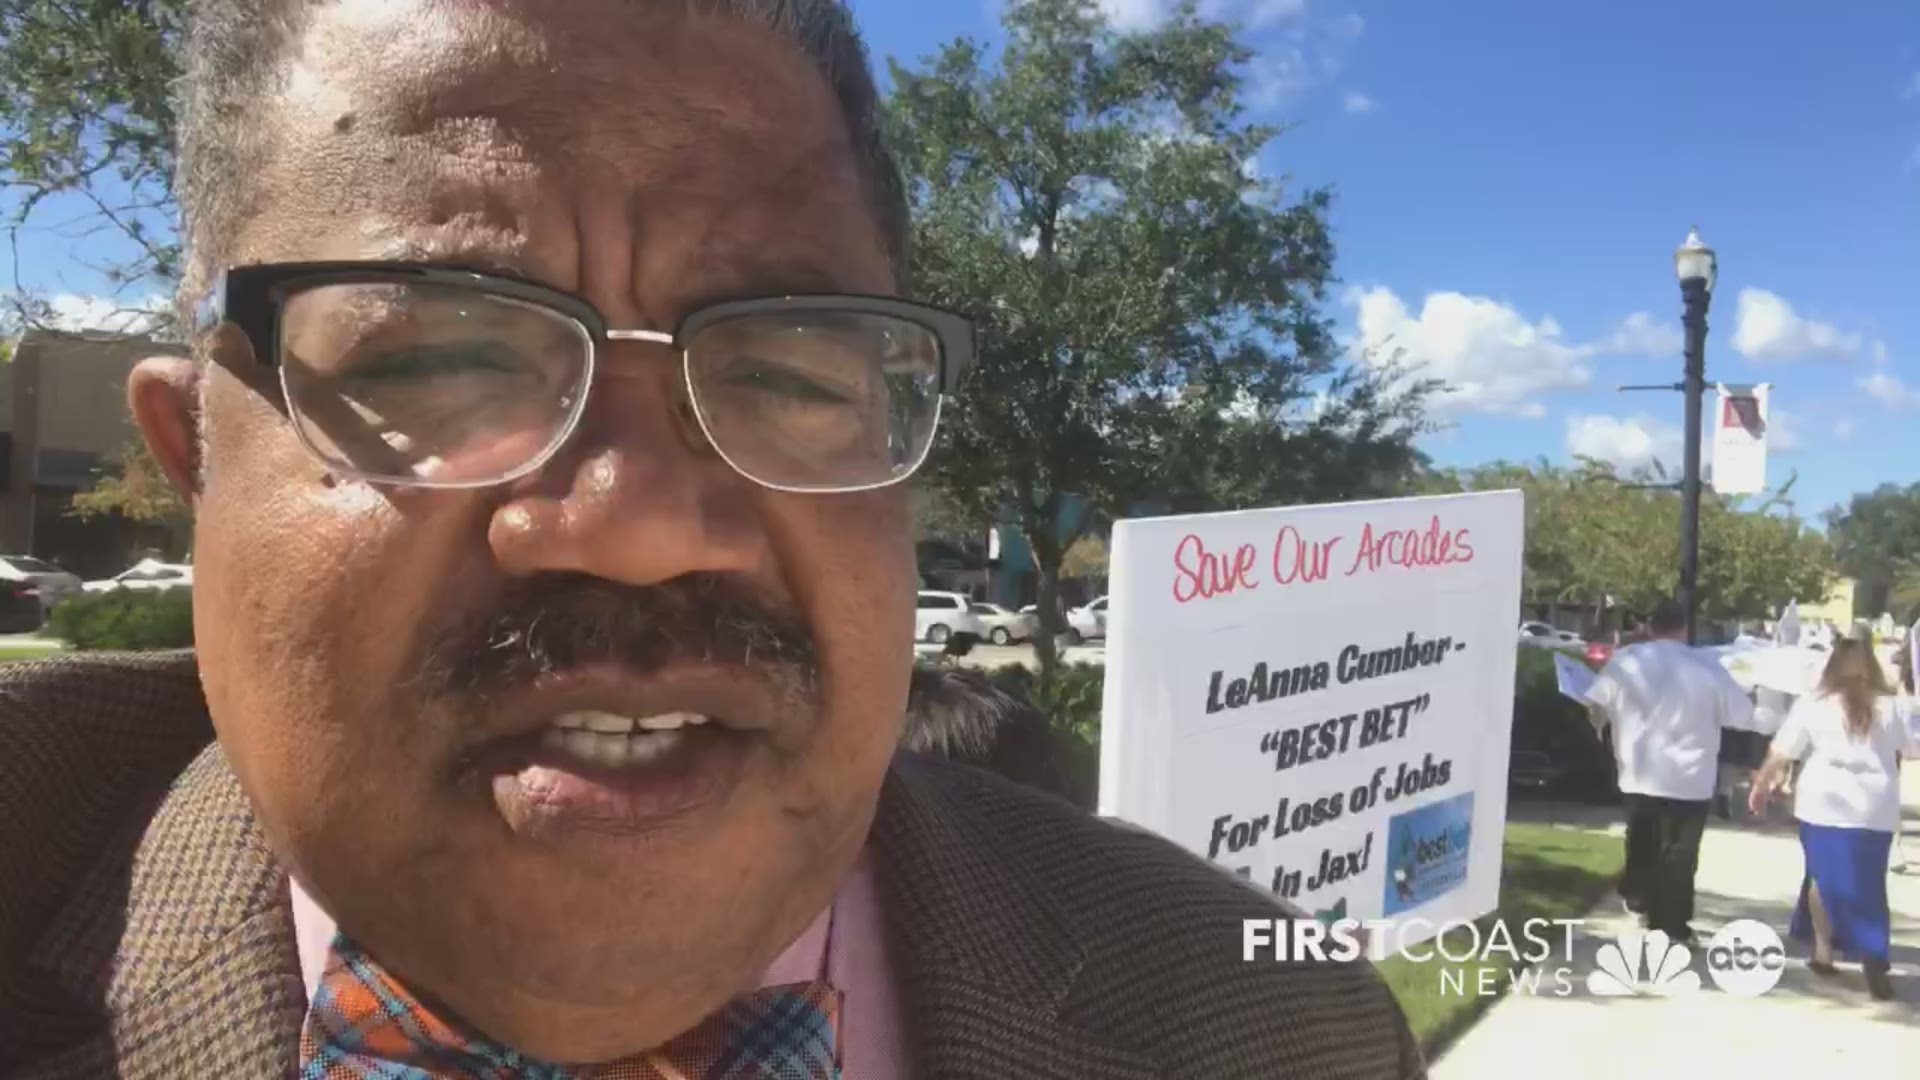 Internet cafe workers are protesting the closing of gaming centers across the First Coast, they are trying to save their jobs.